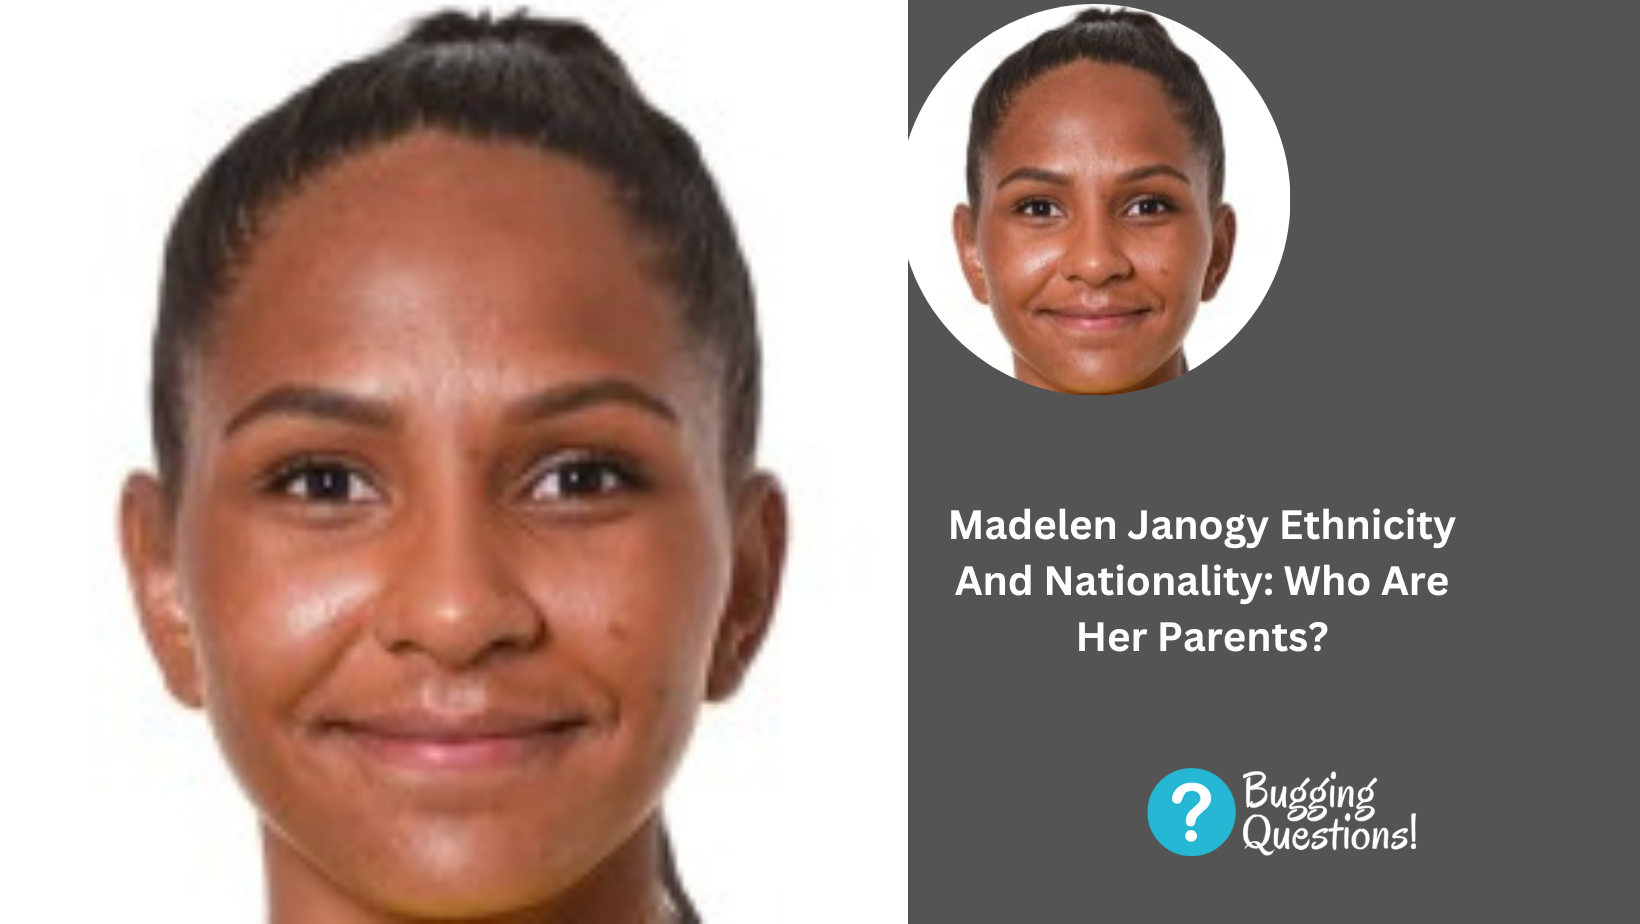 Madelen Janogy Ethnicity And Nationality: Who Are Her Parents?